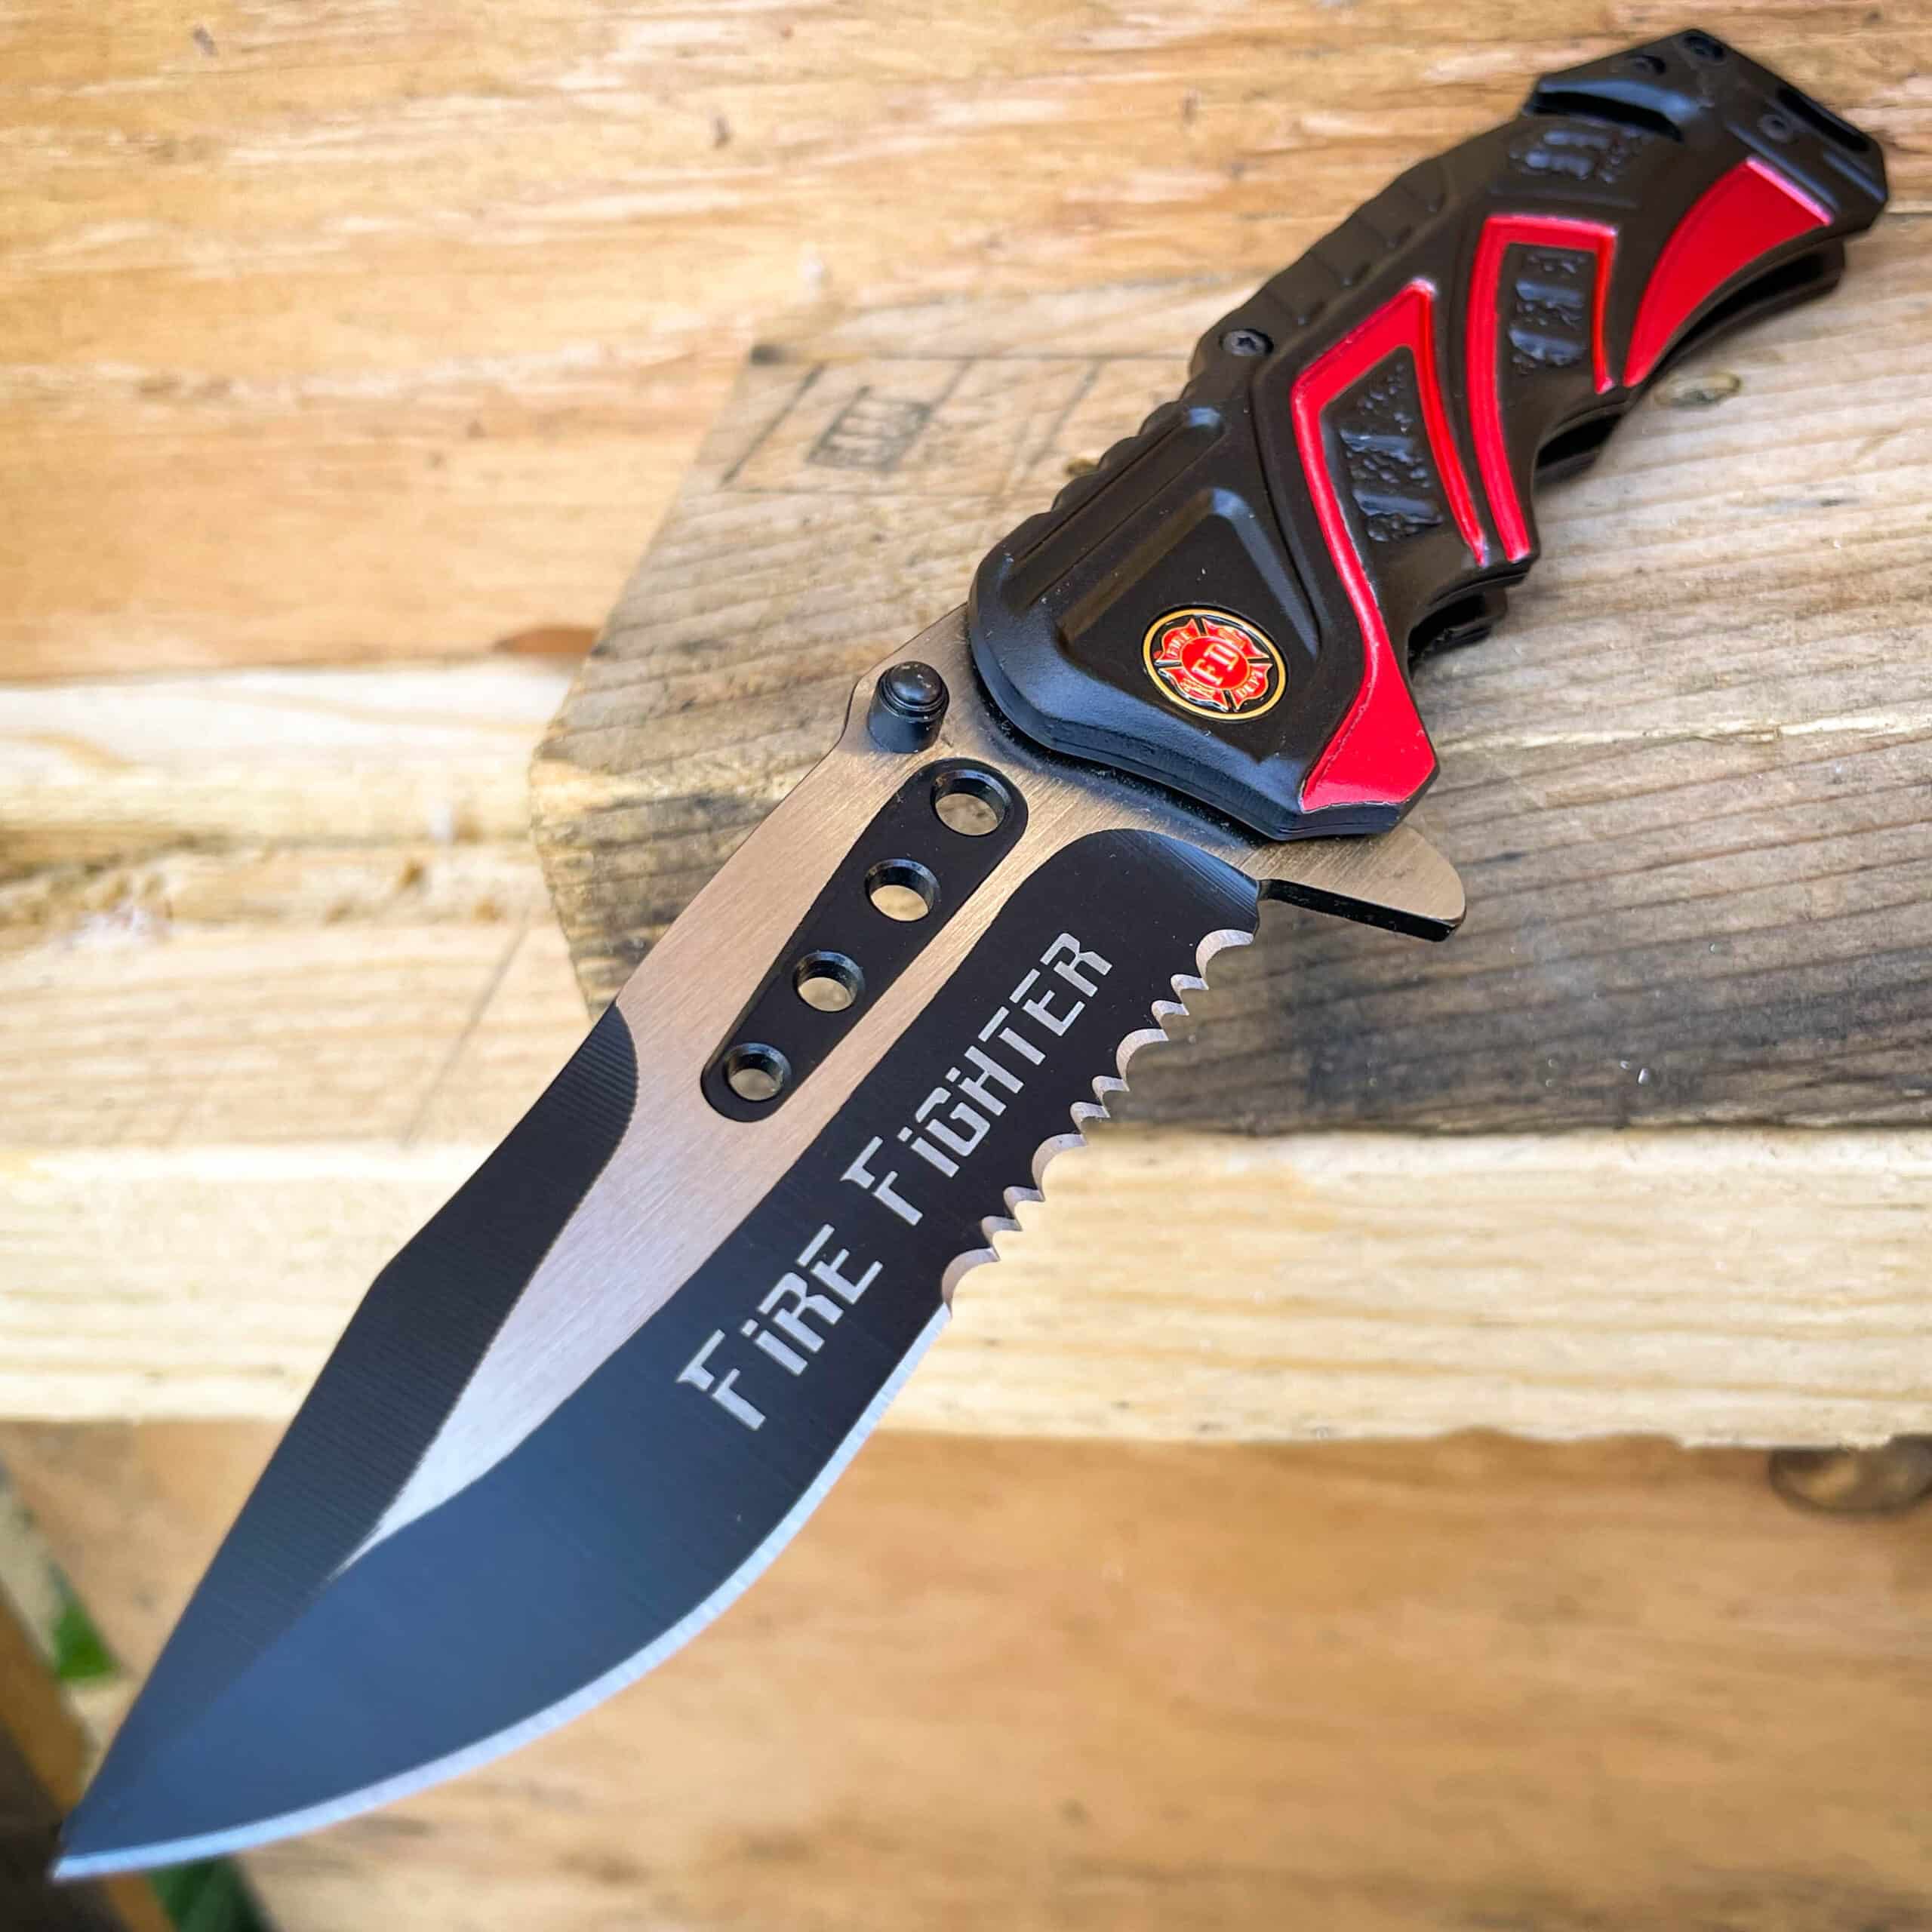 8.25" FIRE FIGHTER SPRING OPEN ASSISTED TACTICAL RESCUE FOLDING POCKET KNIFE RED